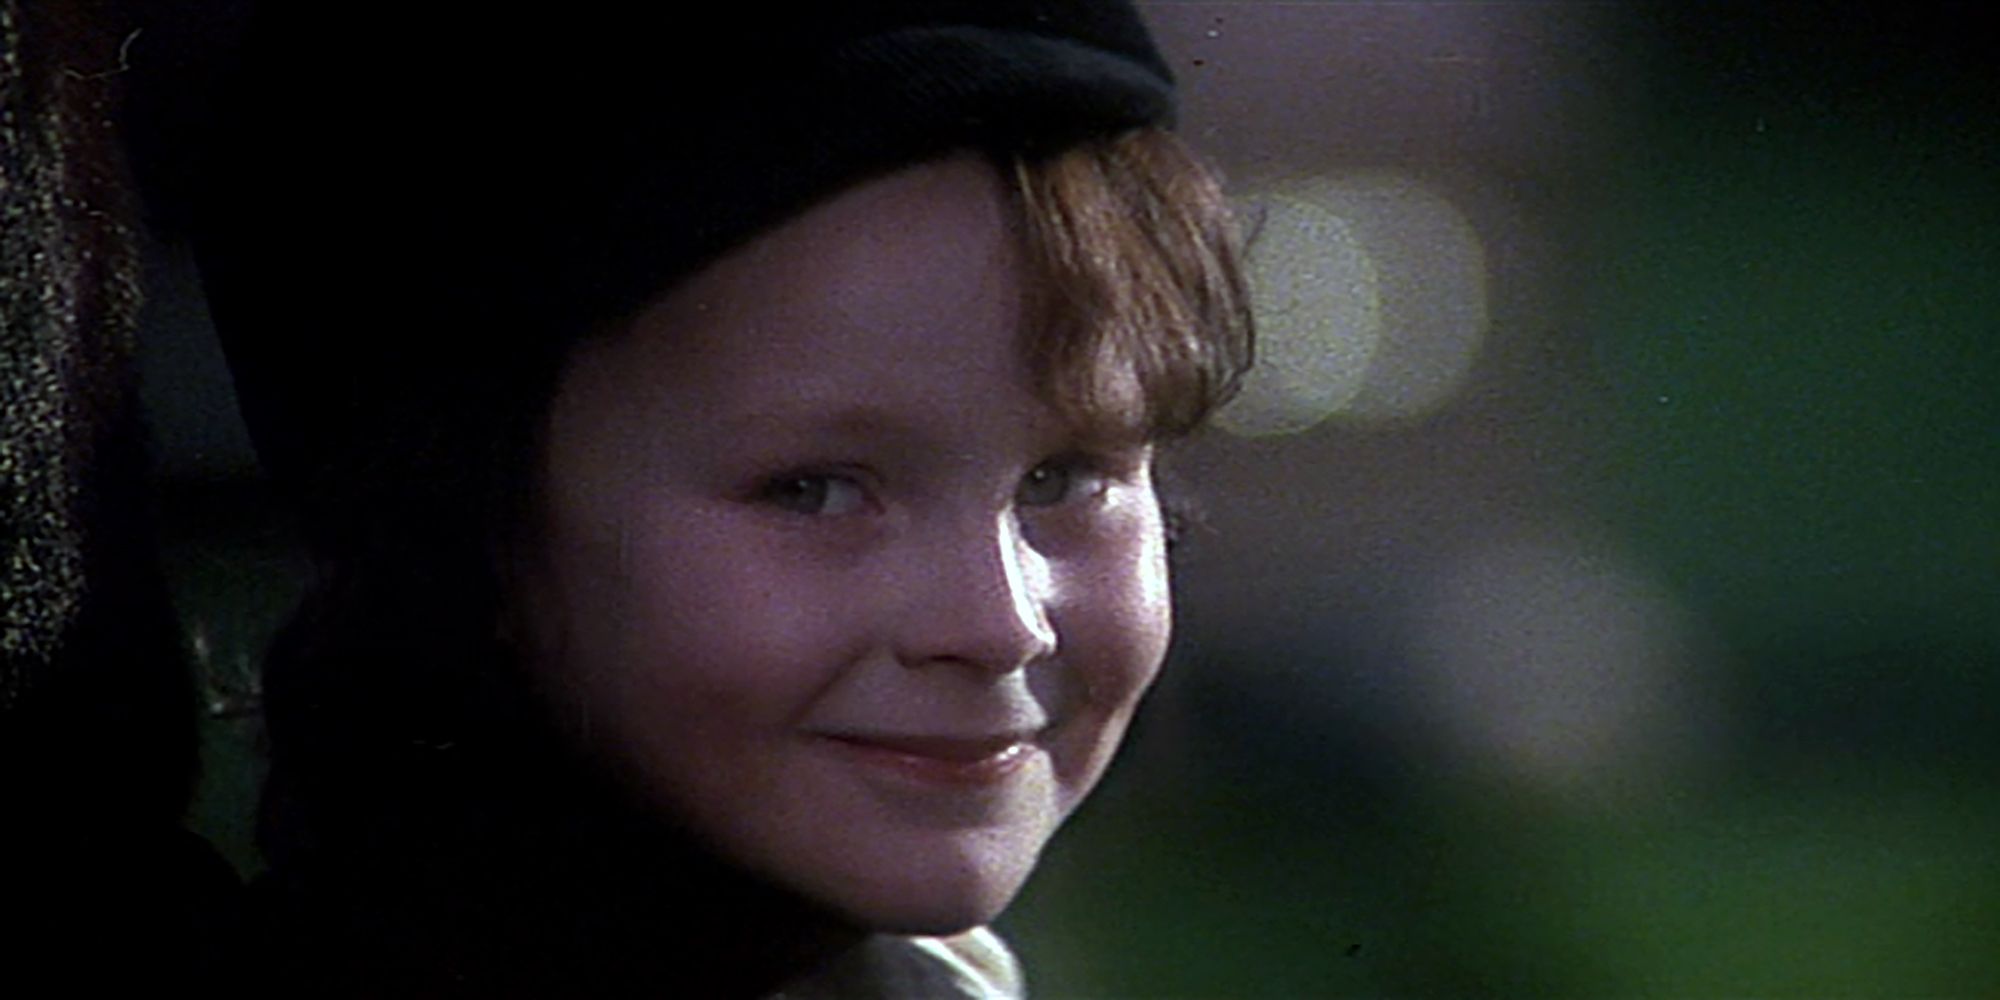 Originally, 'The Omen' had a very different ending